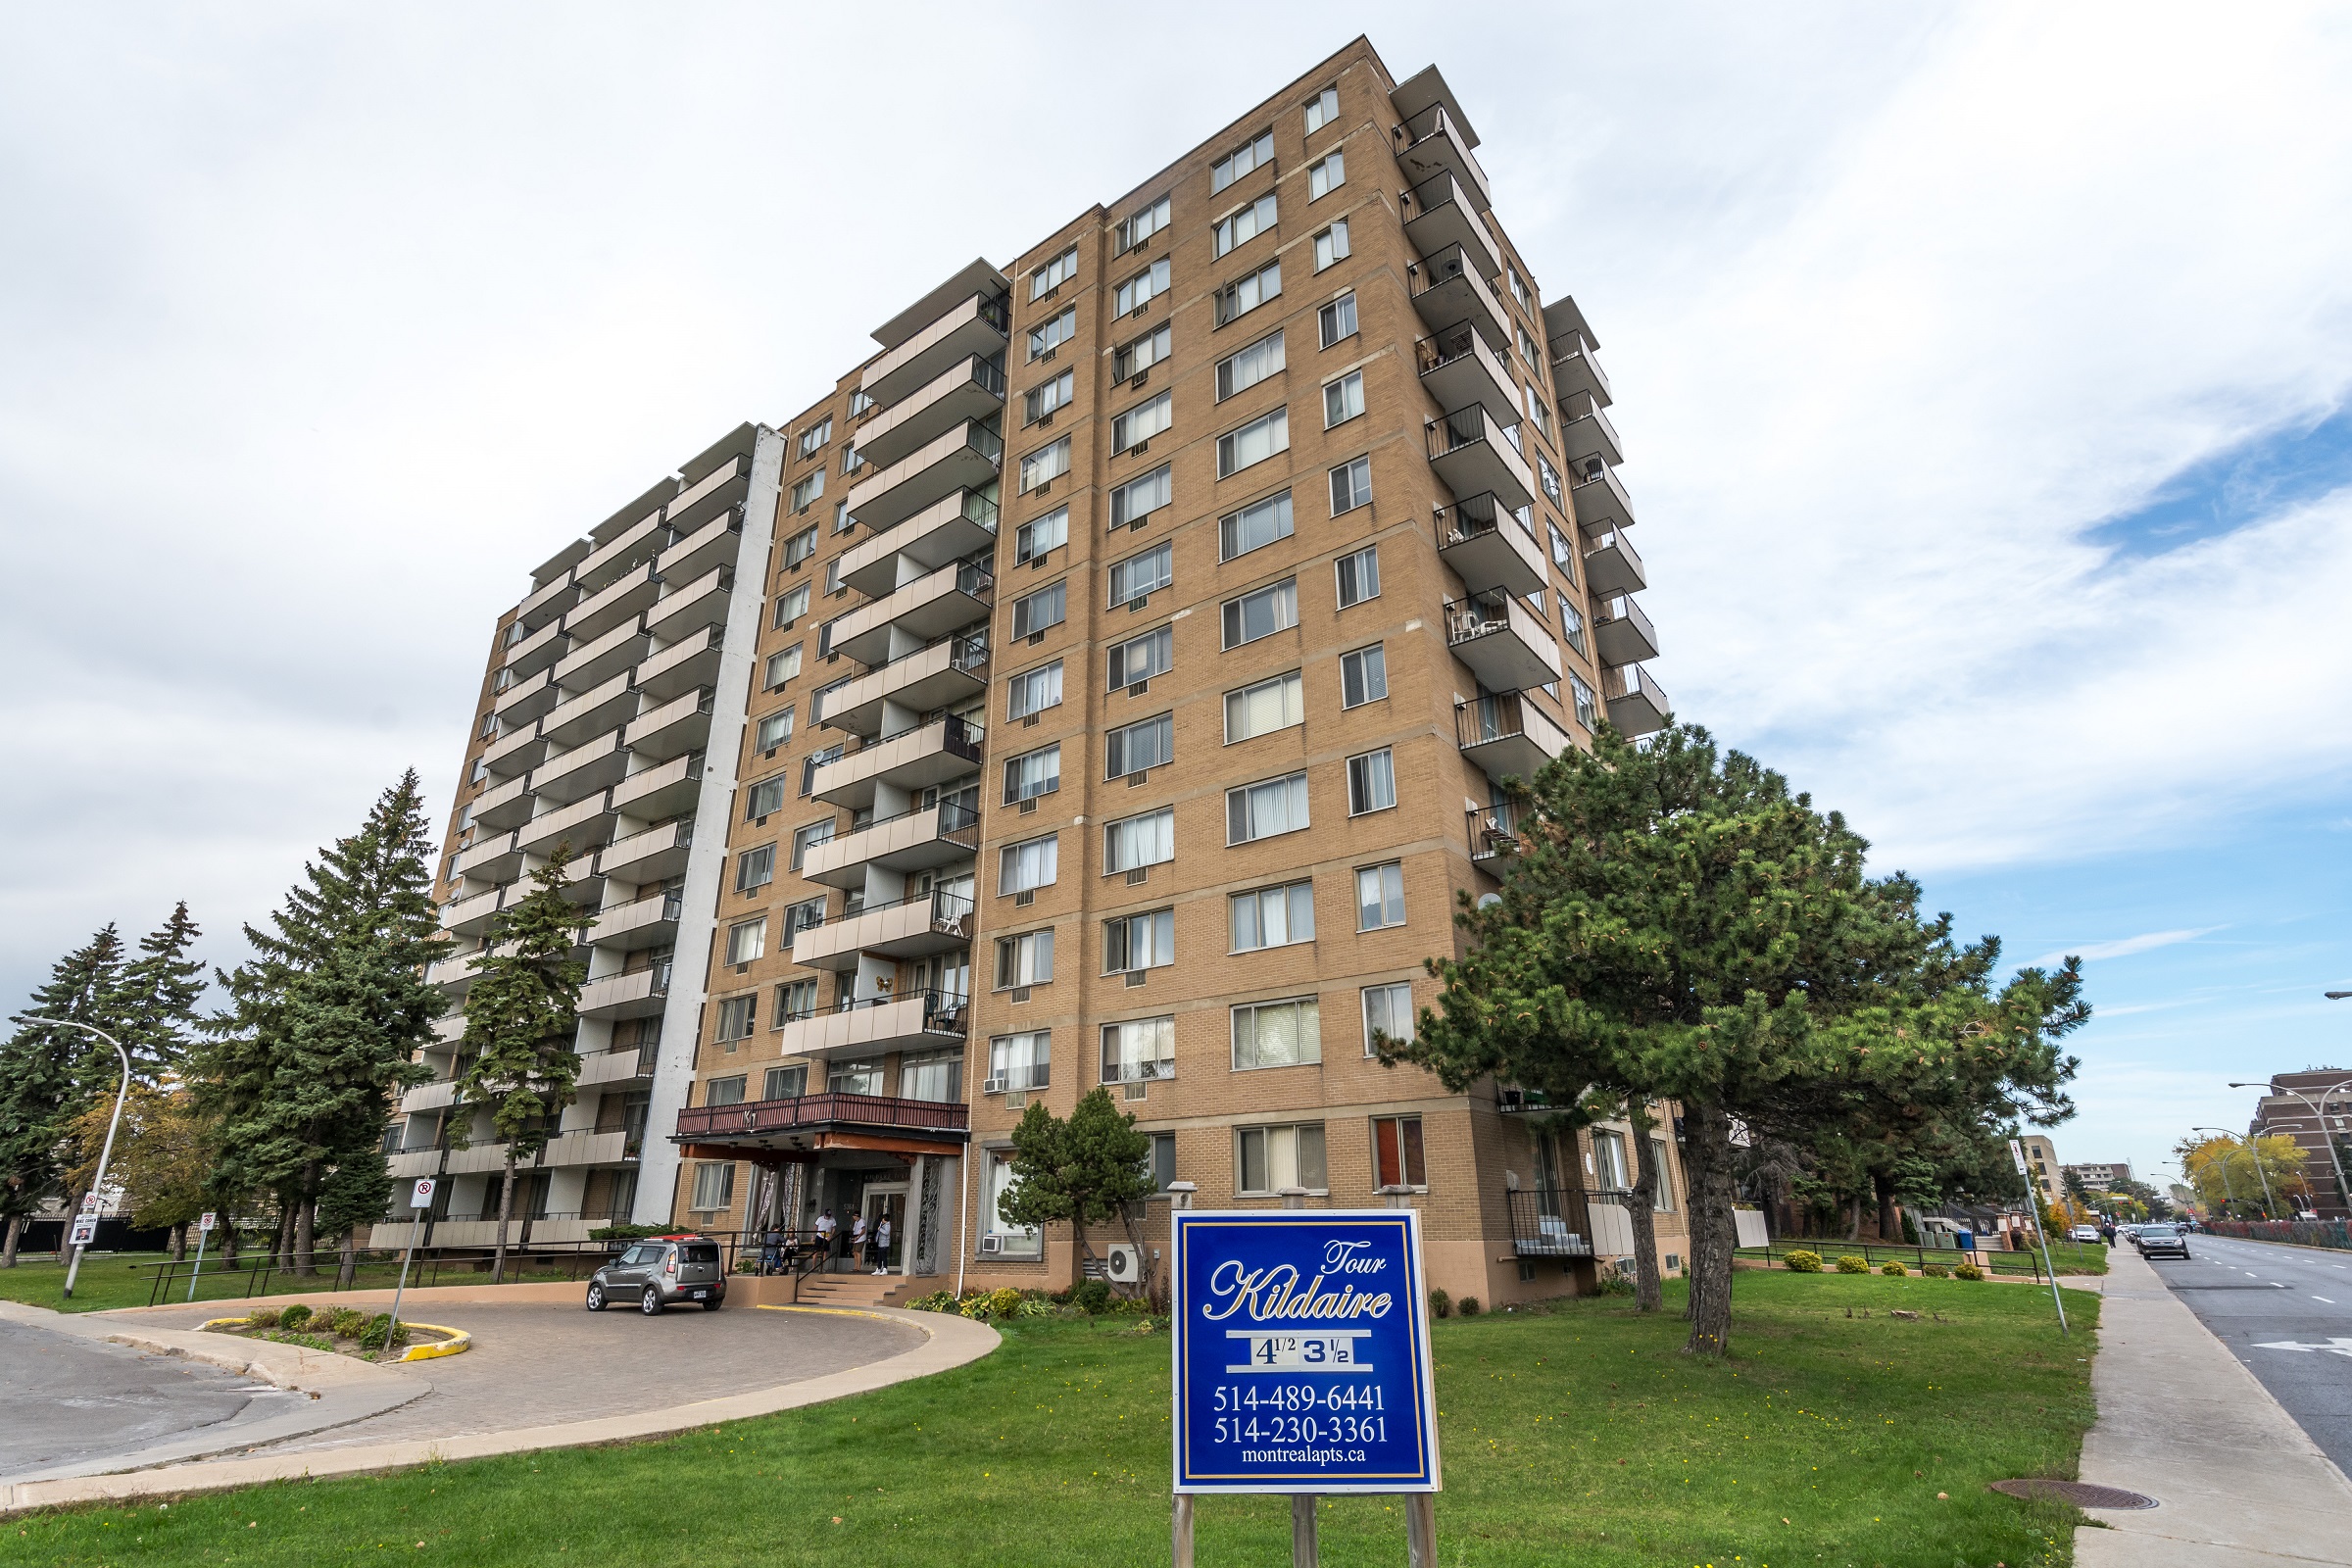 2 bedroom Apartments for rent in Cote-St-Luc at Kildare Towers - Photo 01 - RentQuebecApartments – L2074